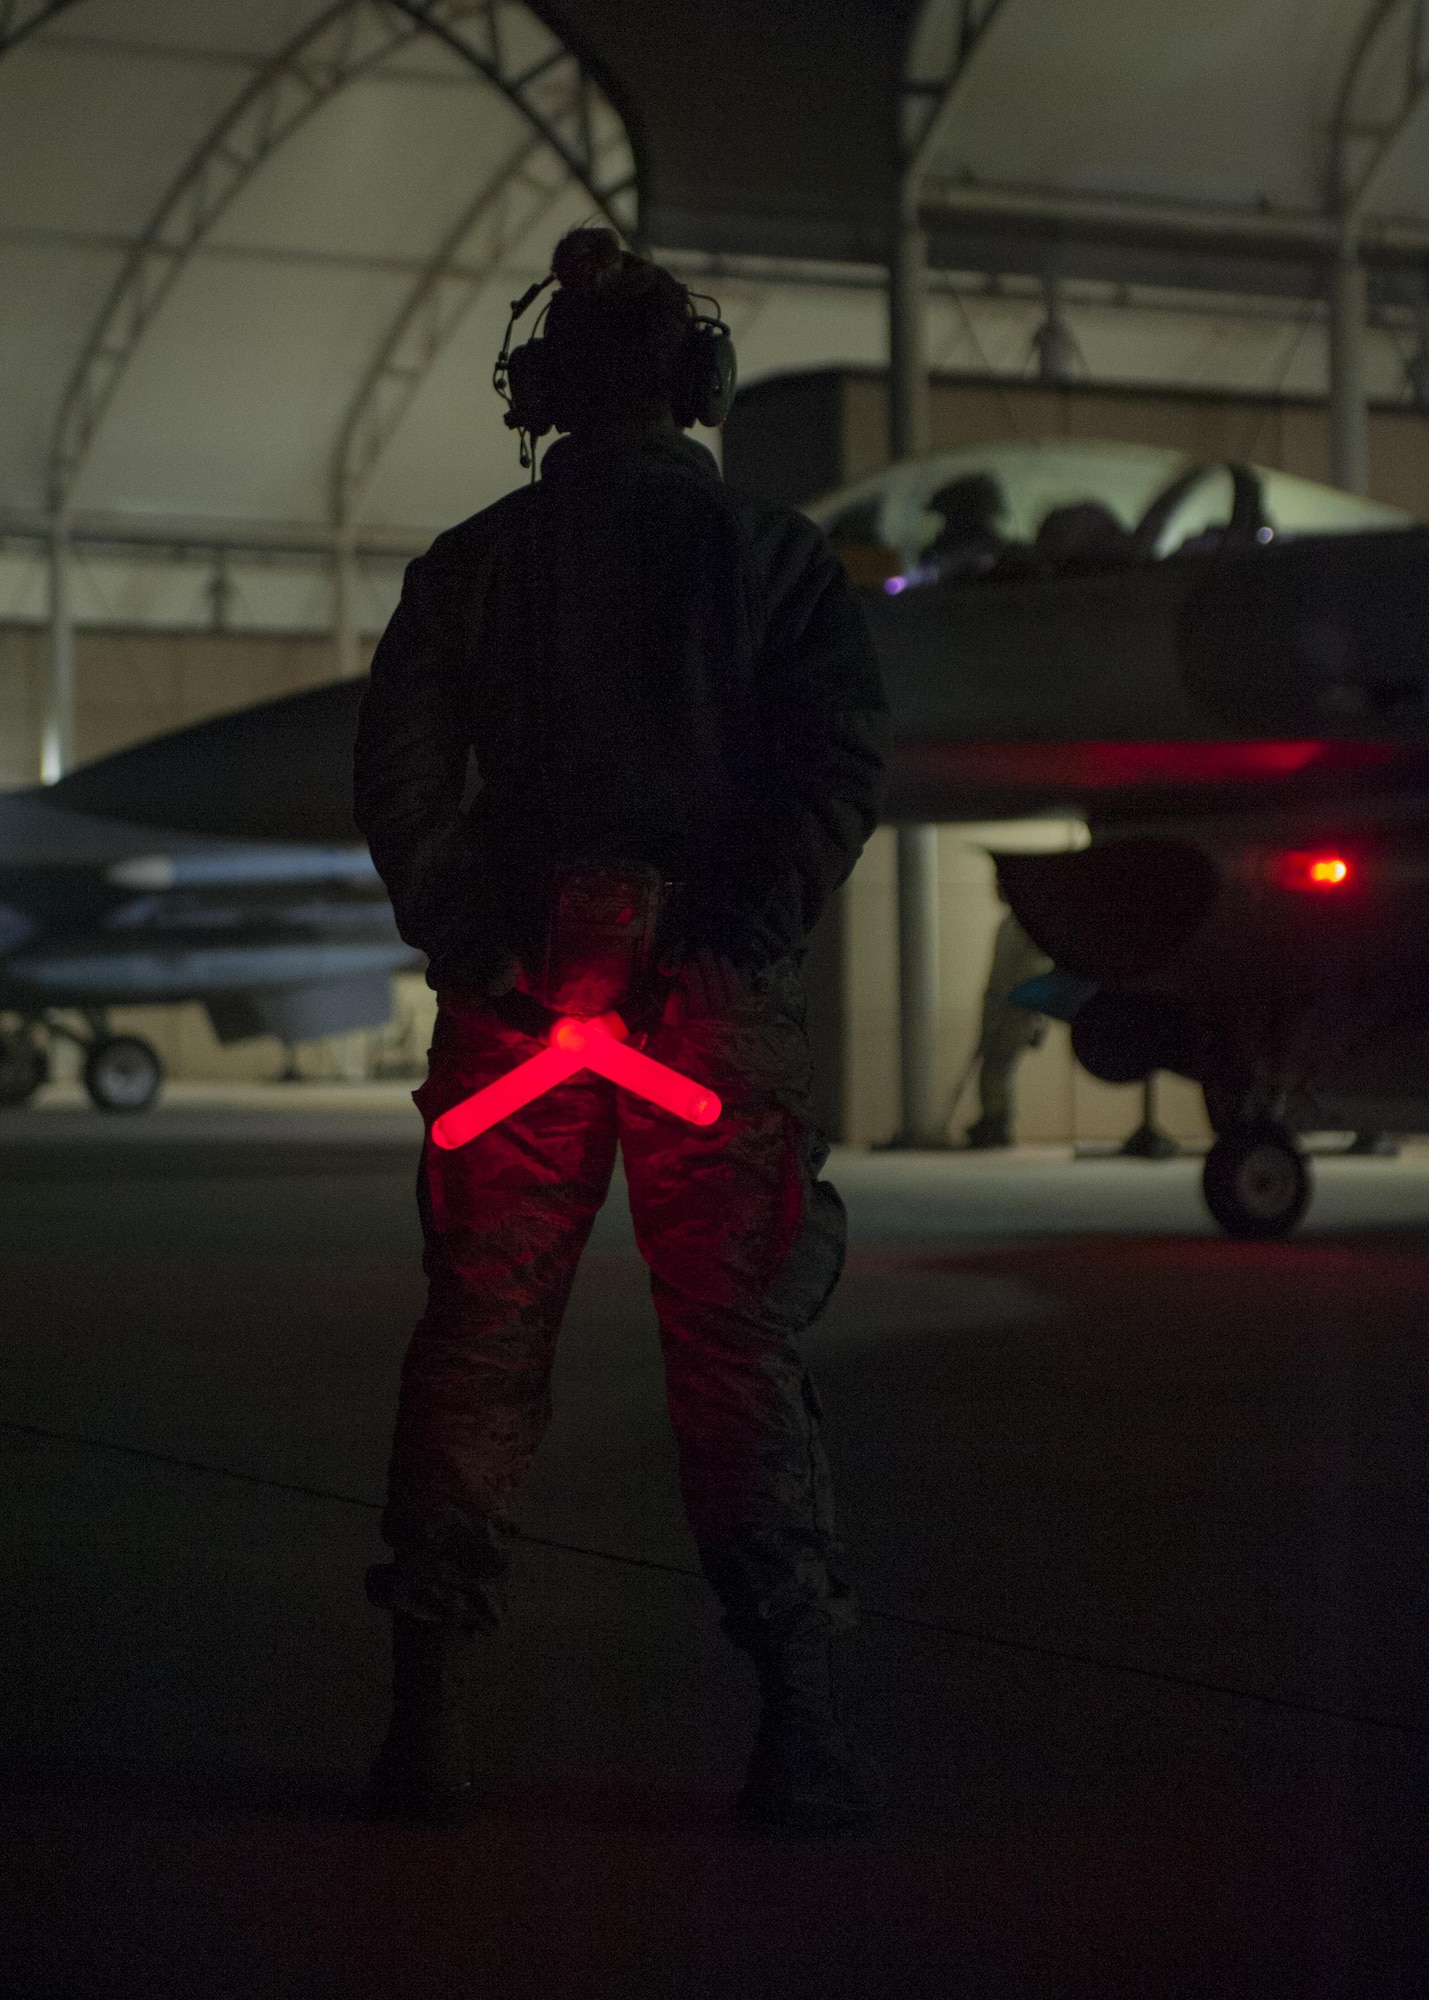 An Airman with the Wisconsin Air National Guard’s115th Fighter Wing awaits the signal from her pilot to marshal their F-16 Fighting Falcon onto the taxiway at Kunsan Air Base, Republic of Korea, Nov. 4, 2017. The aircraft departed early in the morning for their journey back to Wisconsin after a three month deployment in support of a U.S. Pacific Command Theater Security Package. (U.S. Air Force photo by Capt. Christopher Mesnard)